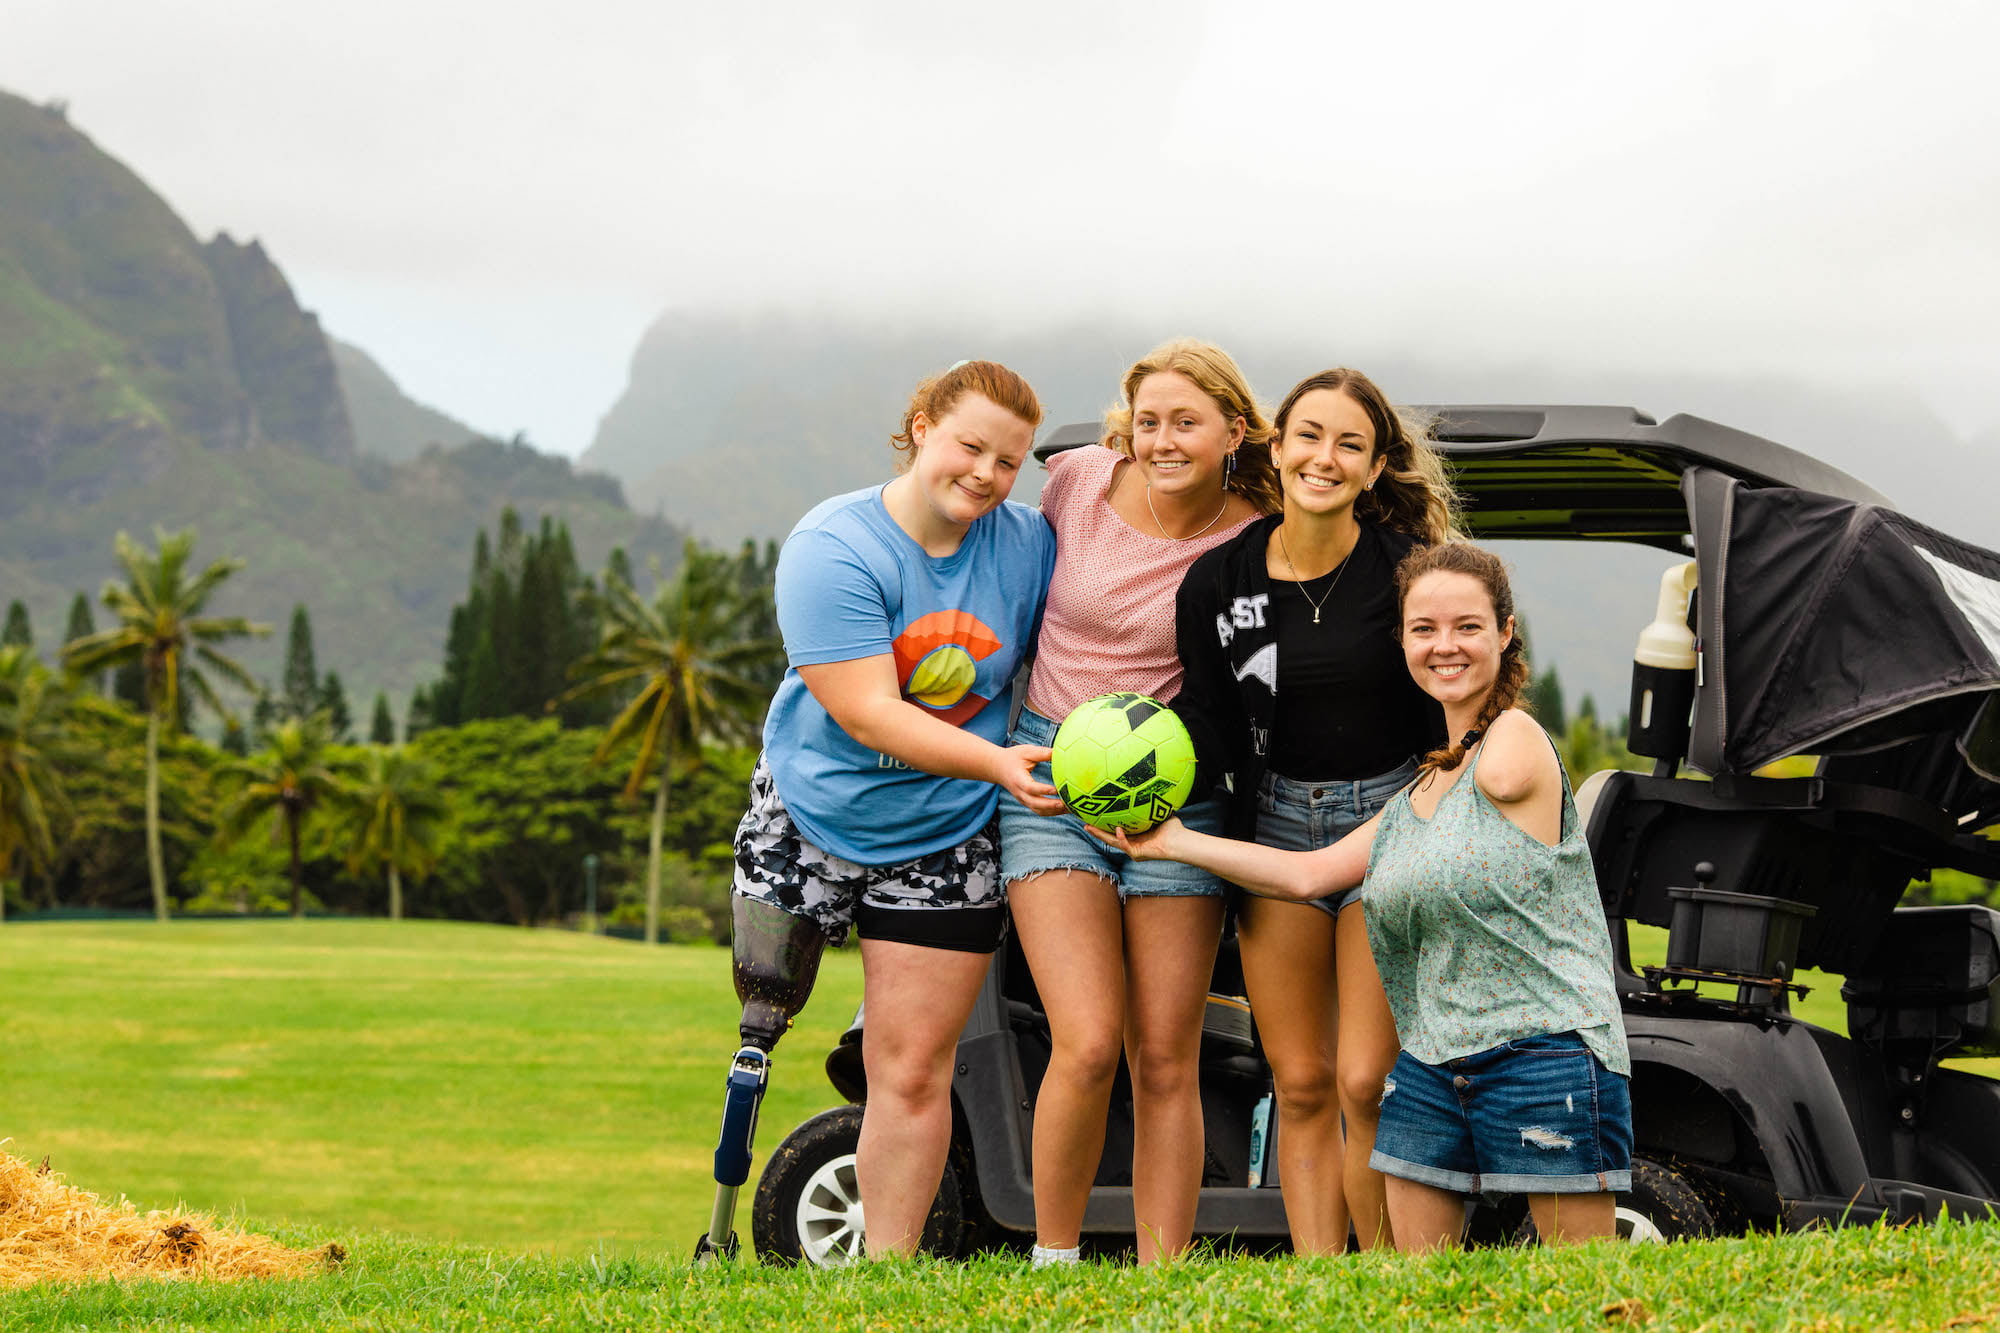 Group photo of attendees with a soccer ball and golf cart